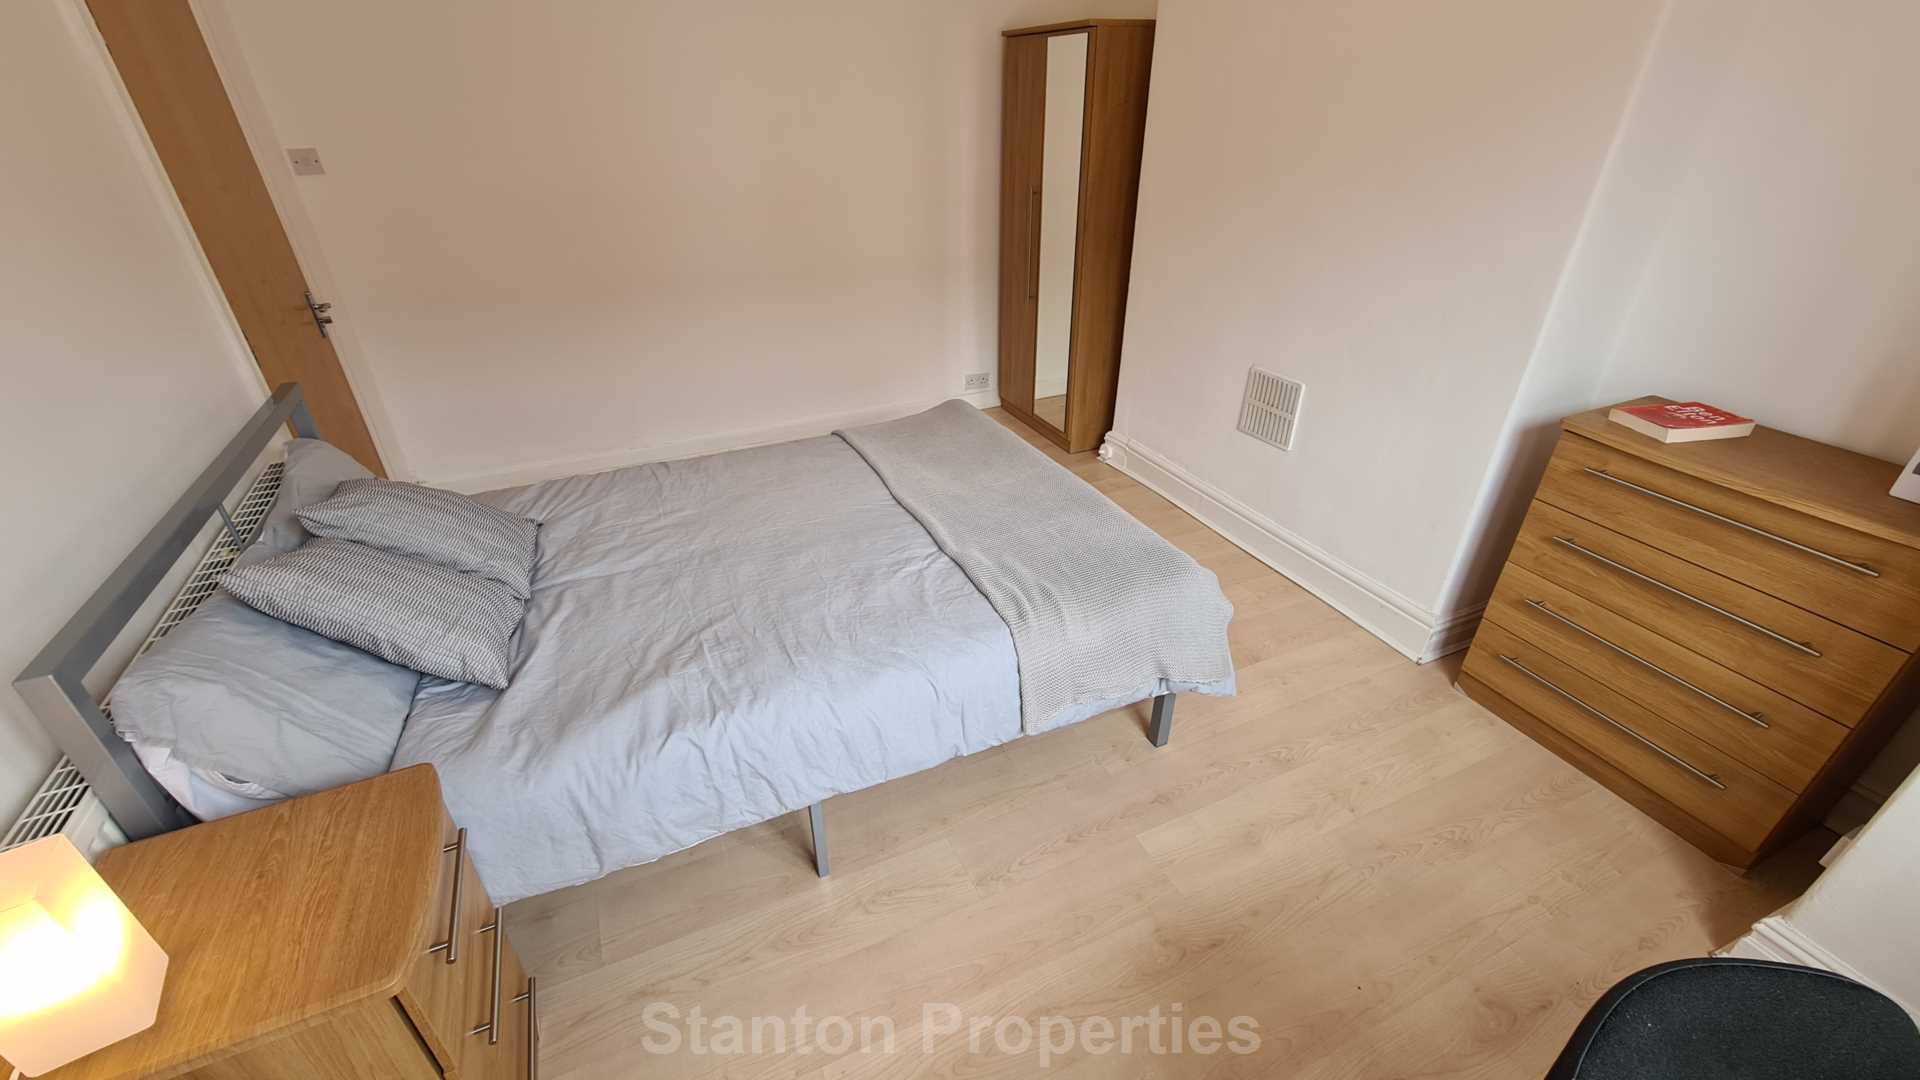 £120 pppw, See Video Tour, Mabfield Road, Manchester, Image 14